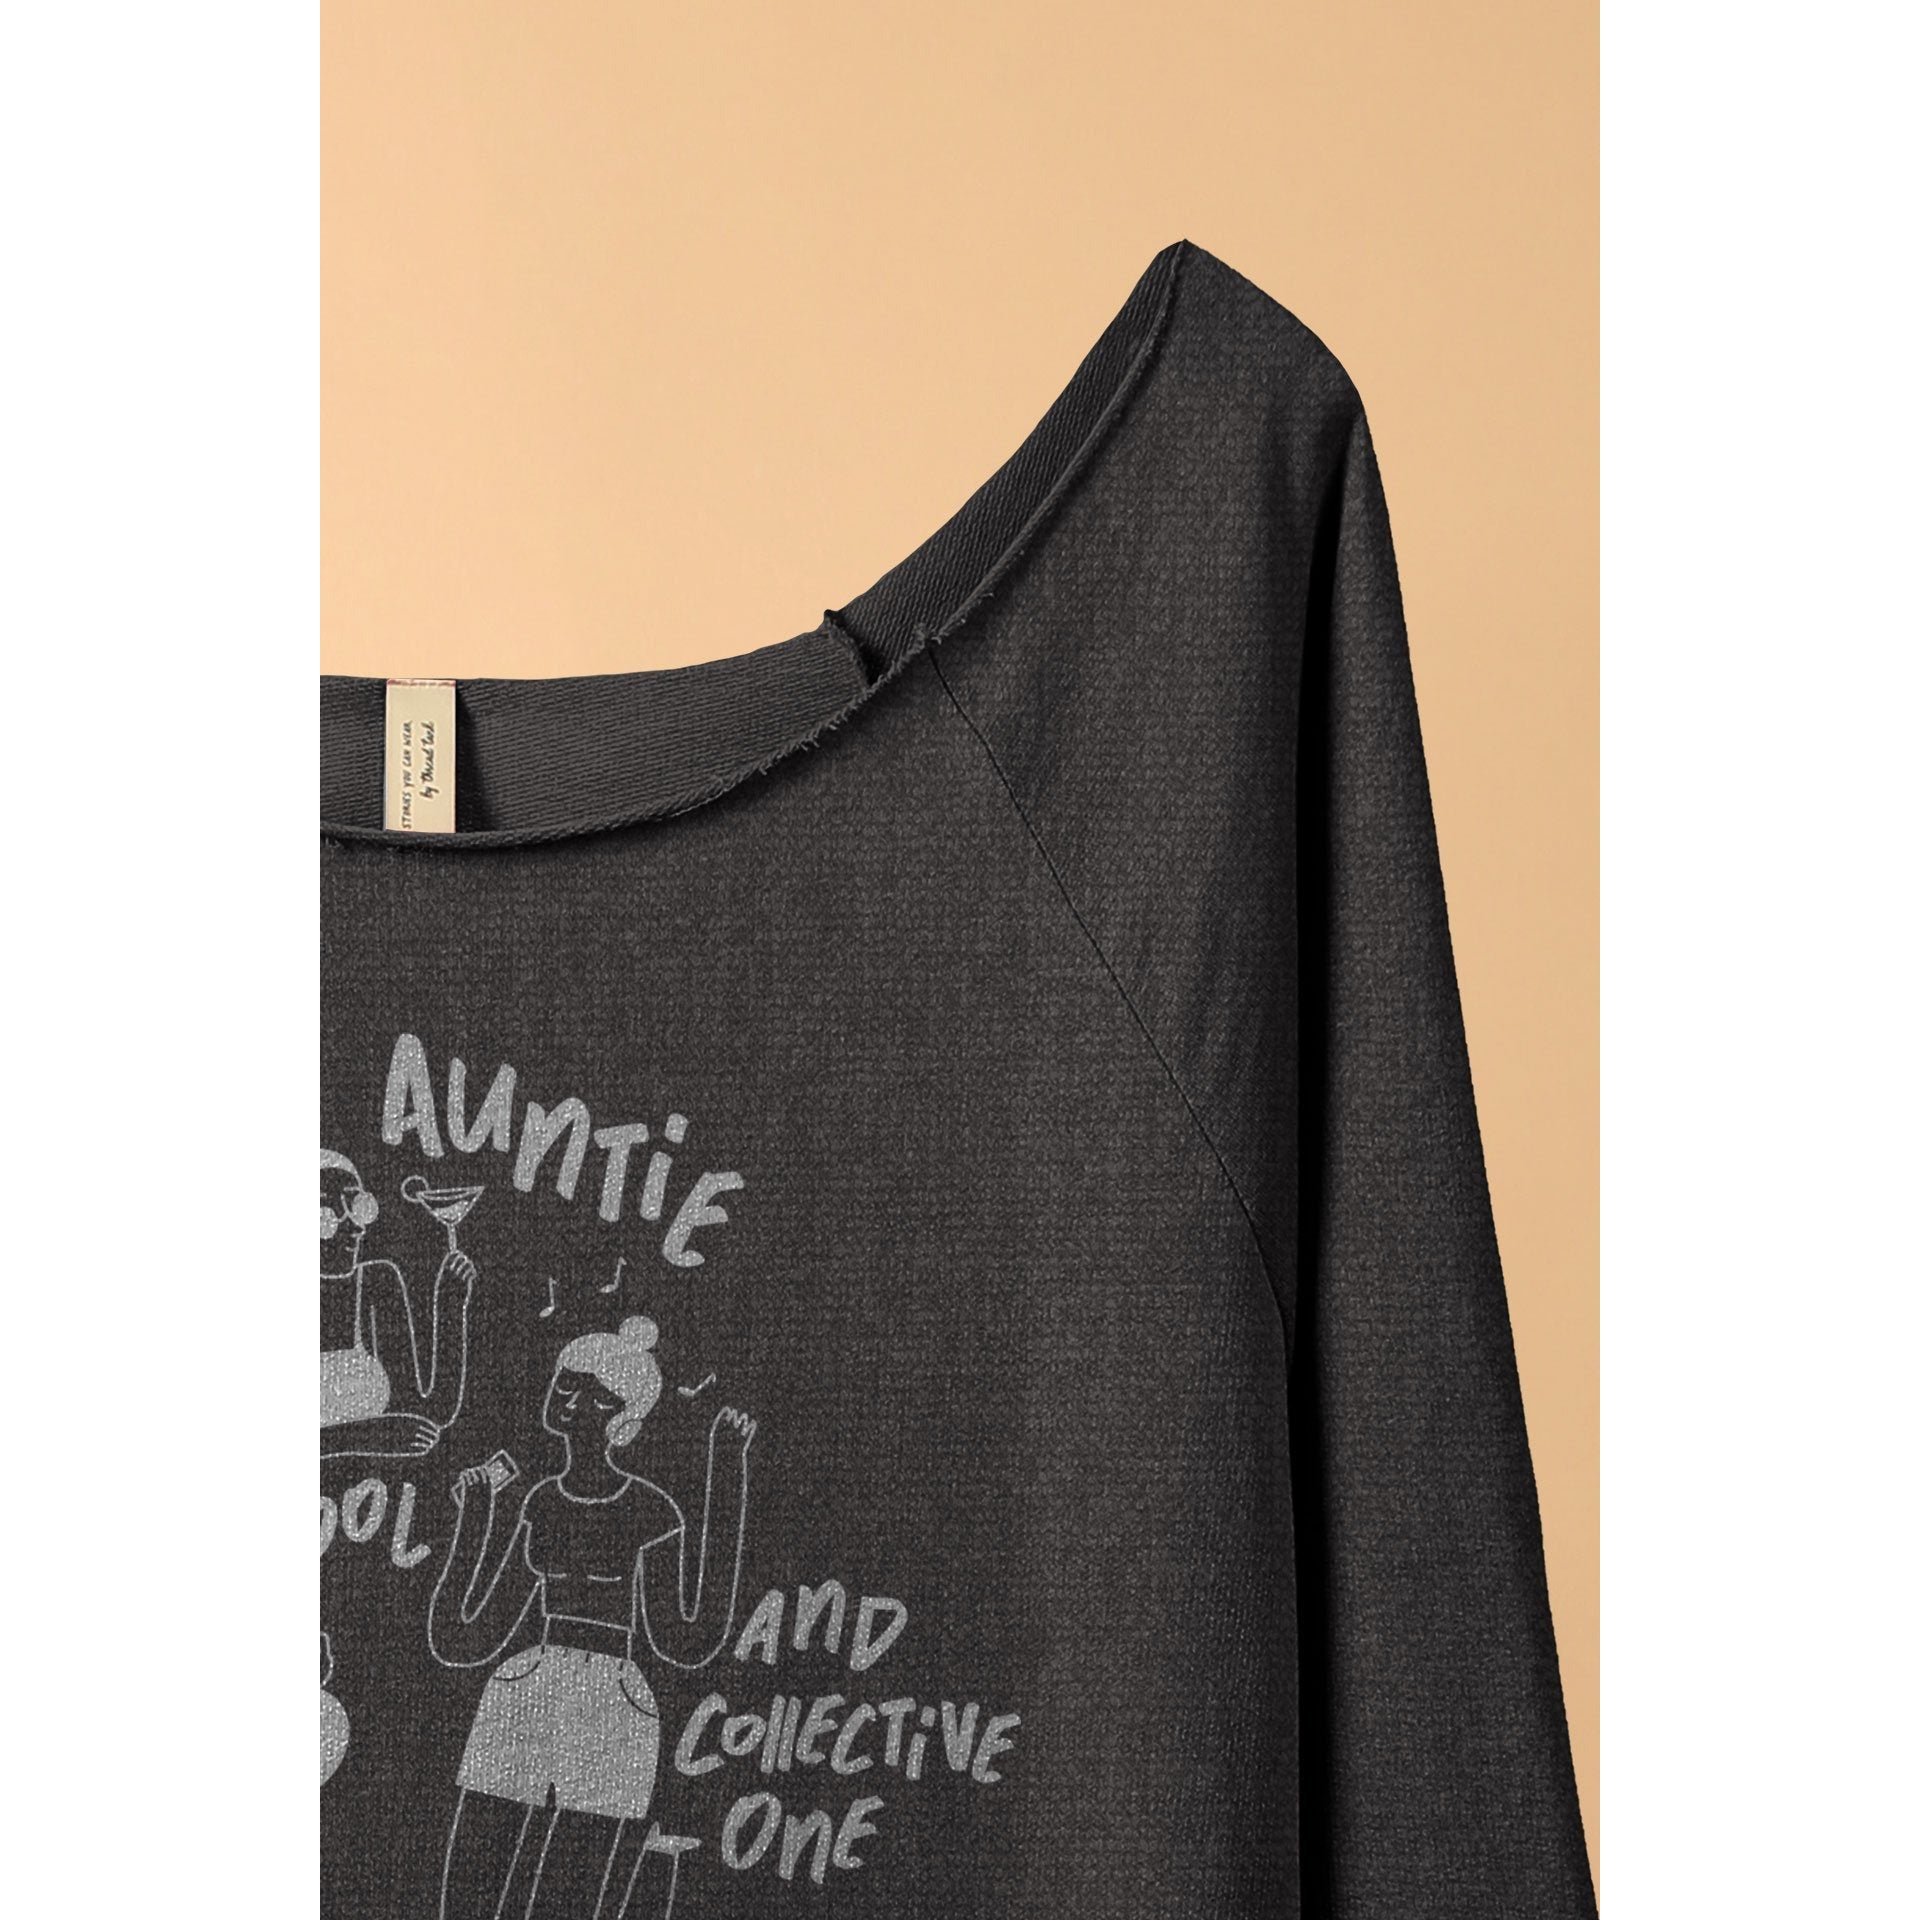 Auntie - The Calm, Cool, and Collective One - threadtank | stories you can wear